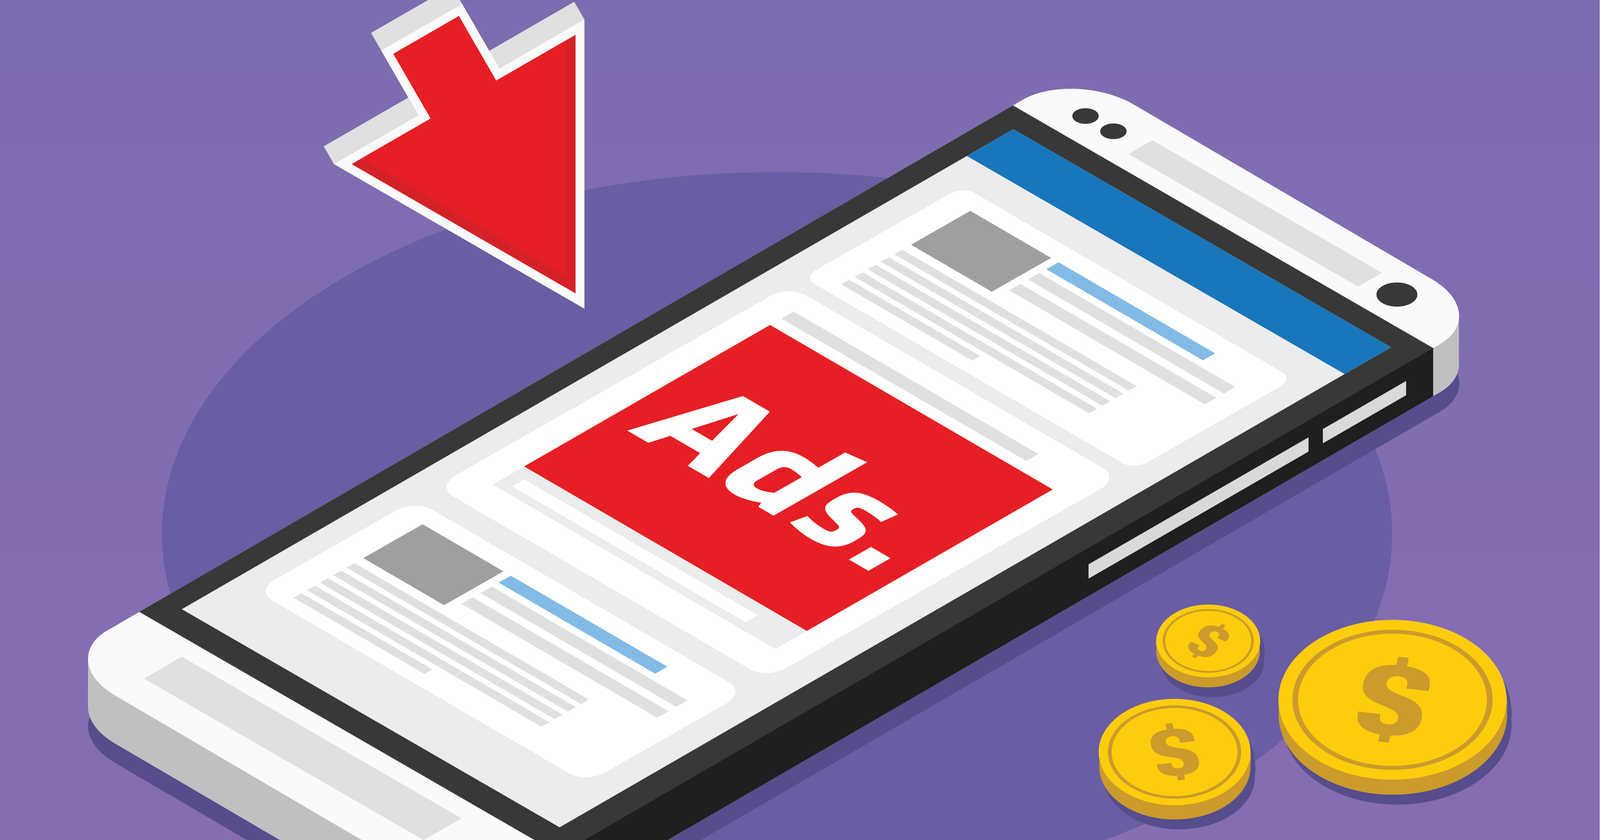 Customers Think Social Media Ads are Filling Their Feeds, but 70% Still Click [STUDY]